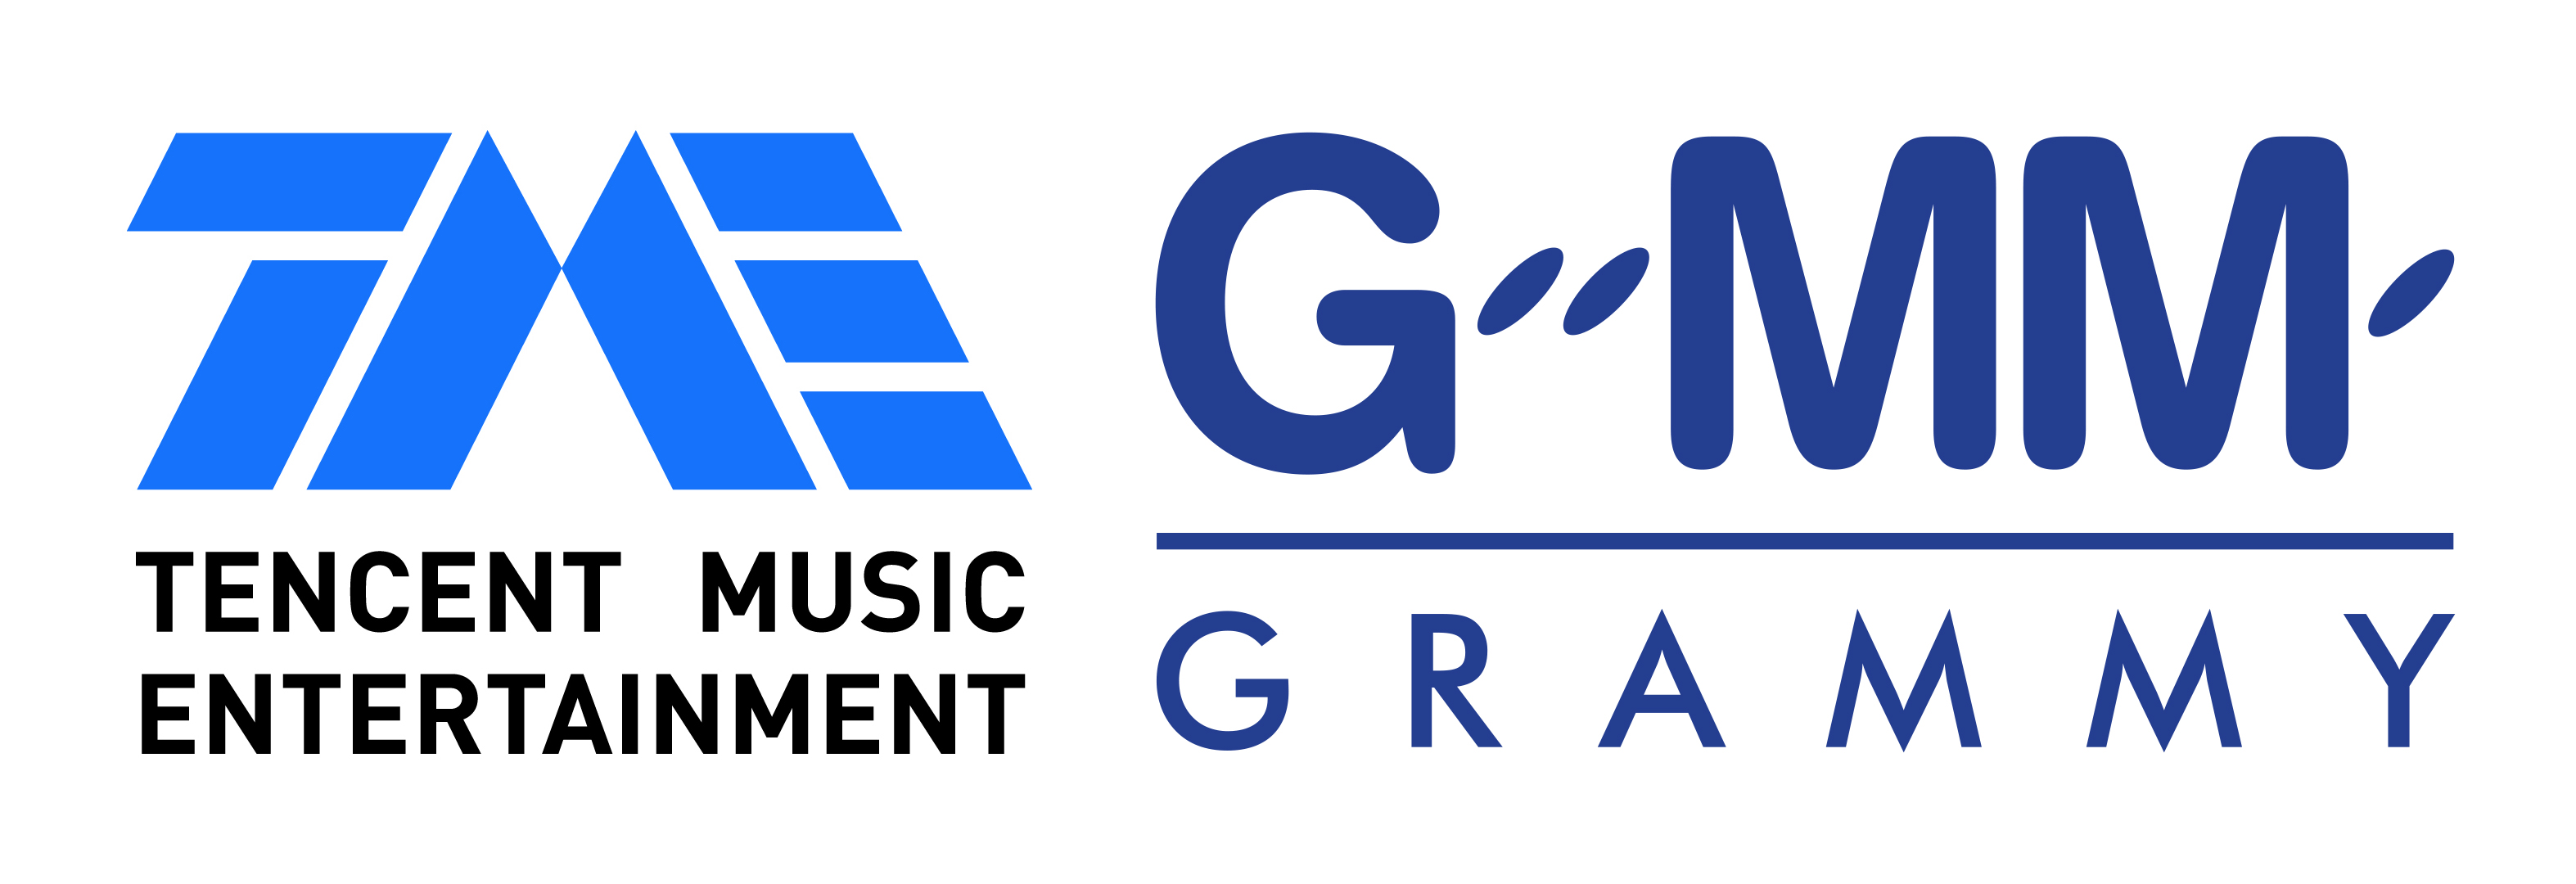 Tencent Music sign a partnership with Thailand’s largest media conglomerate GMM Grammy